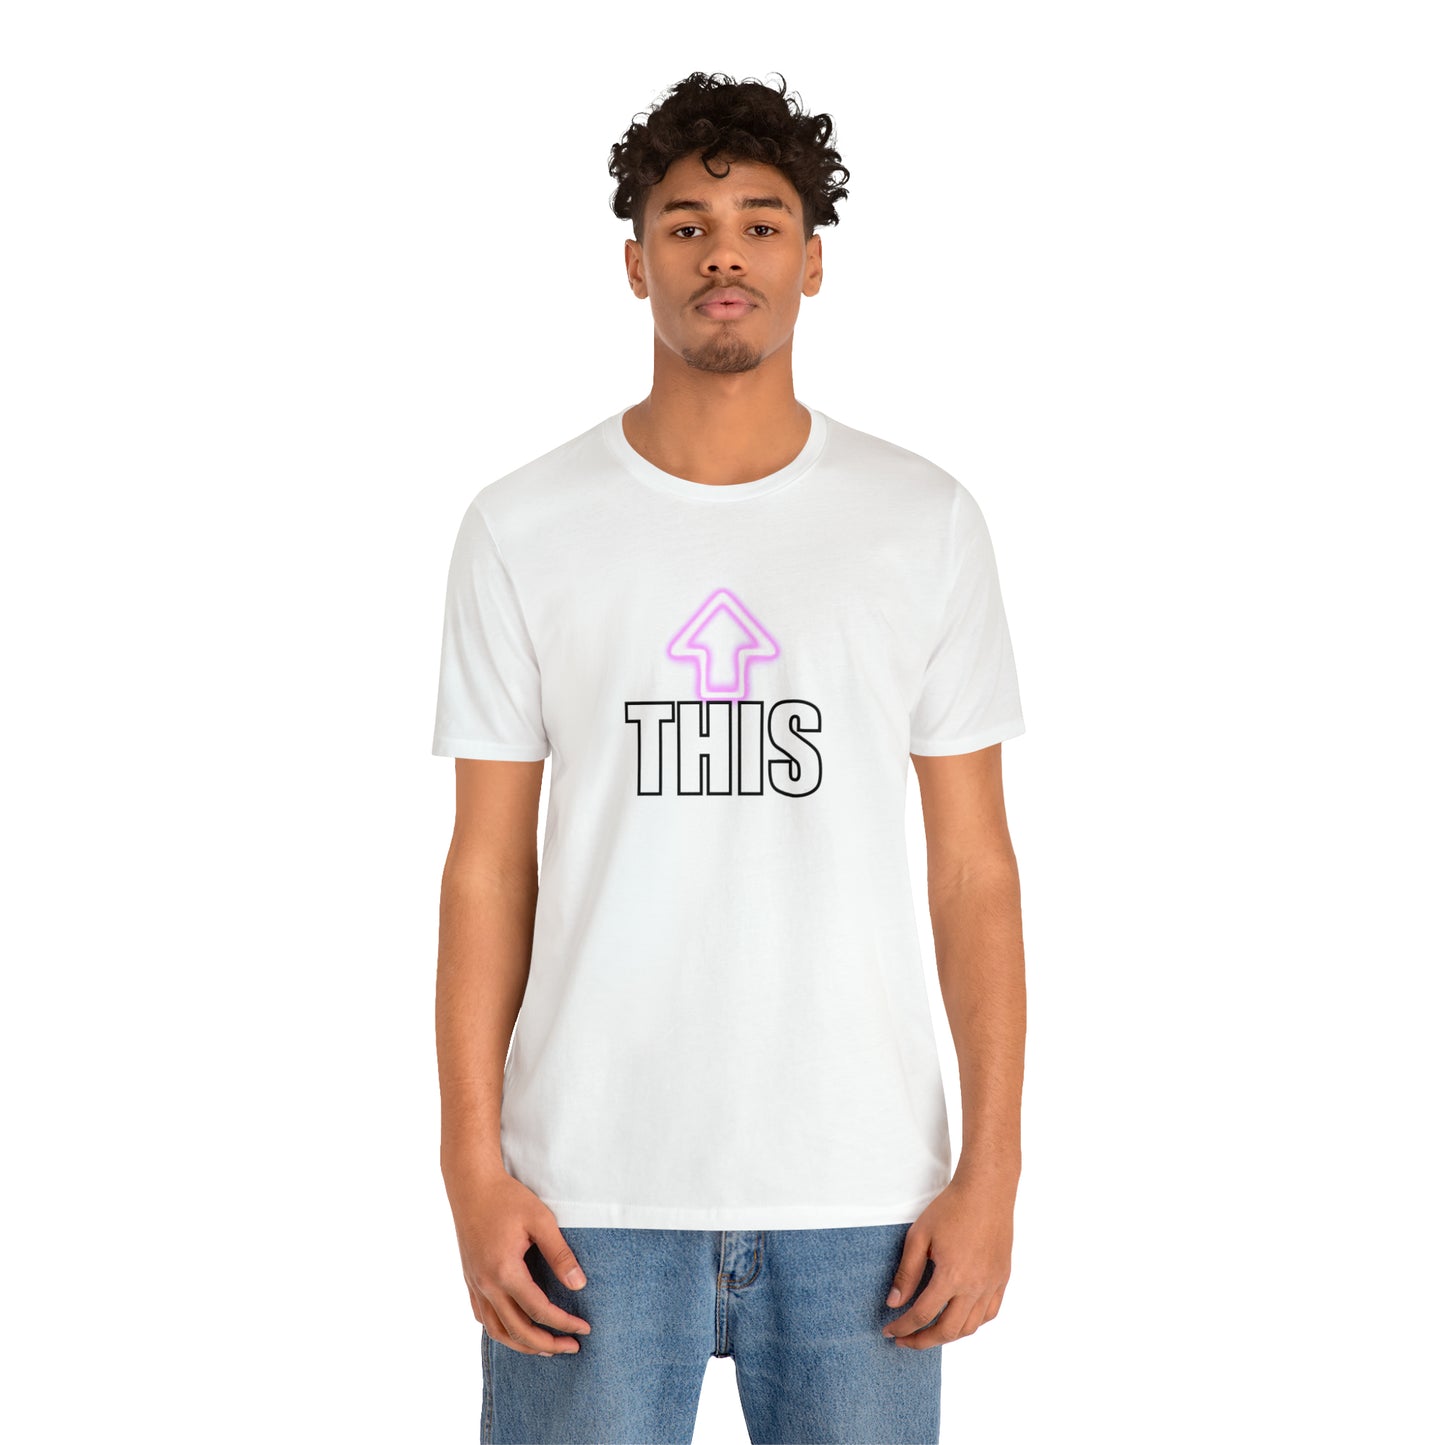 "This" - Short Sleeve Tee (Multiple Color Options)